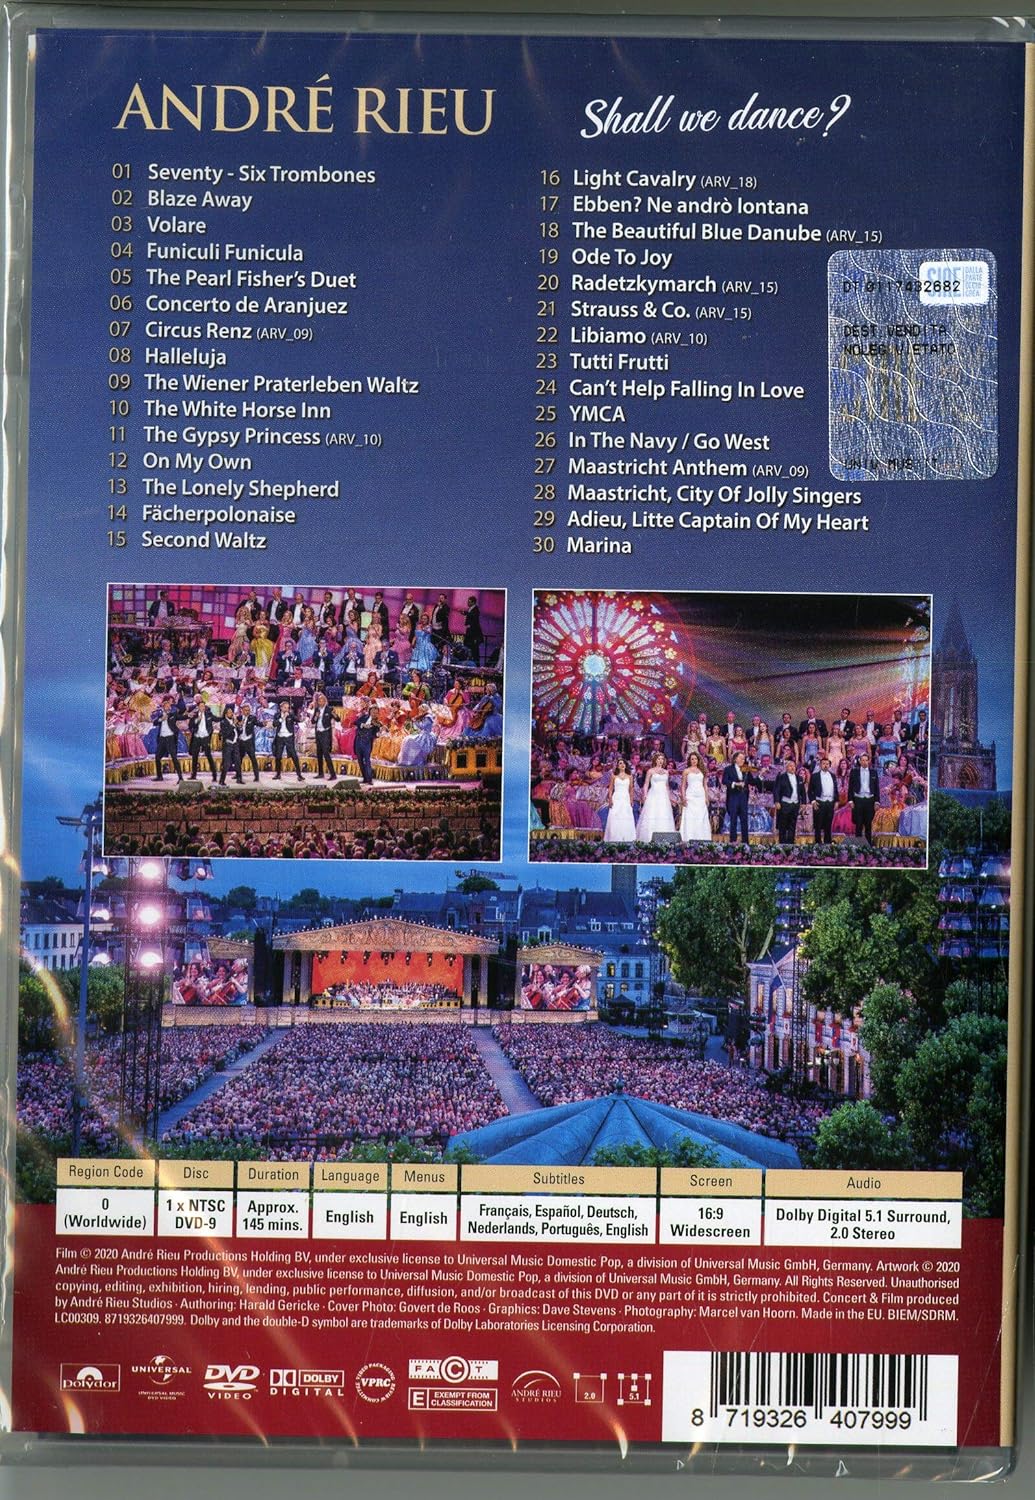 Shall We Dance? - Live In Maastricht (DVD) | Andre Rieu